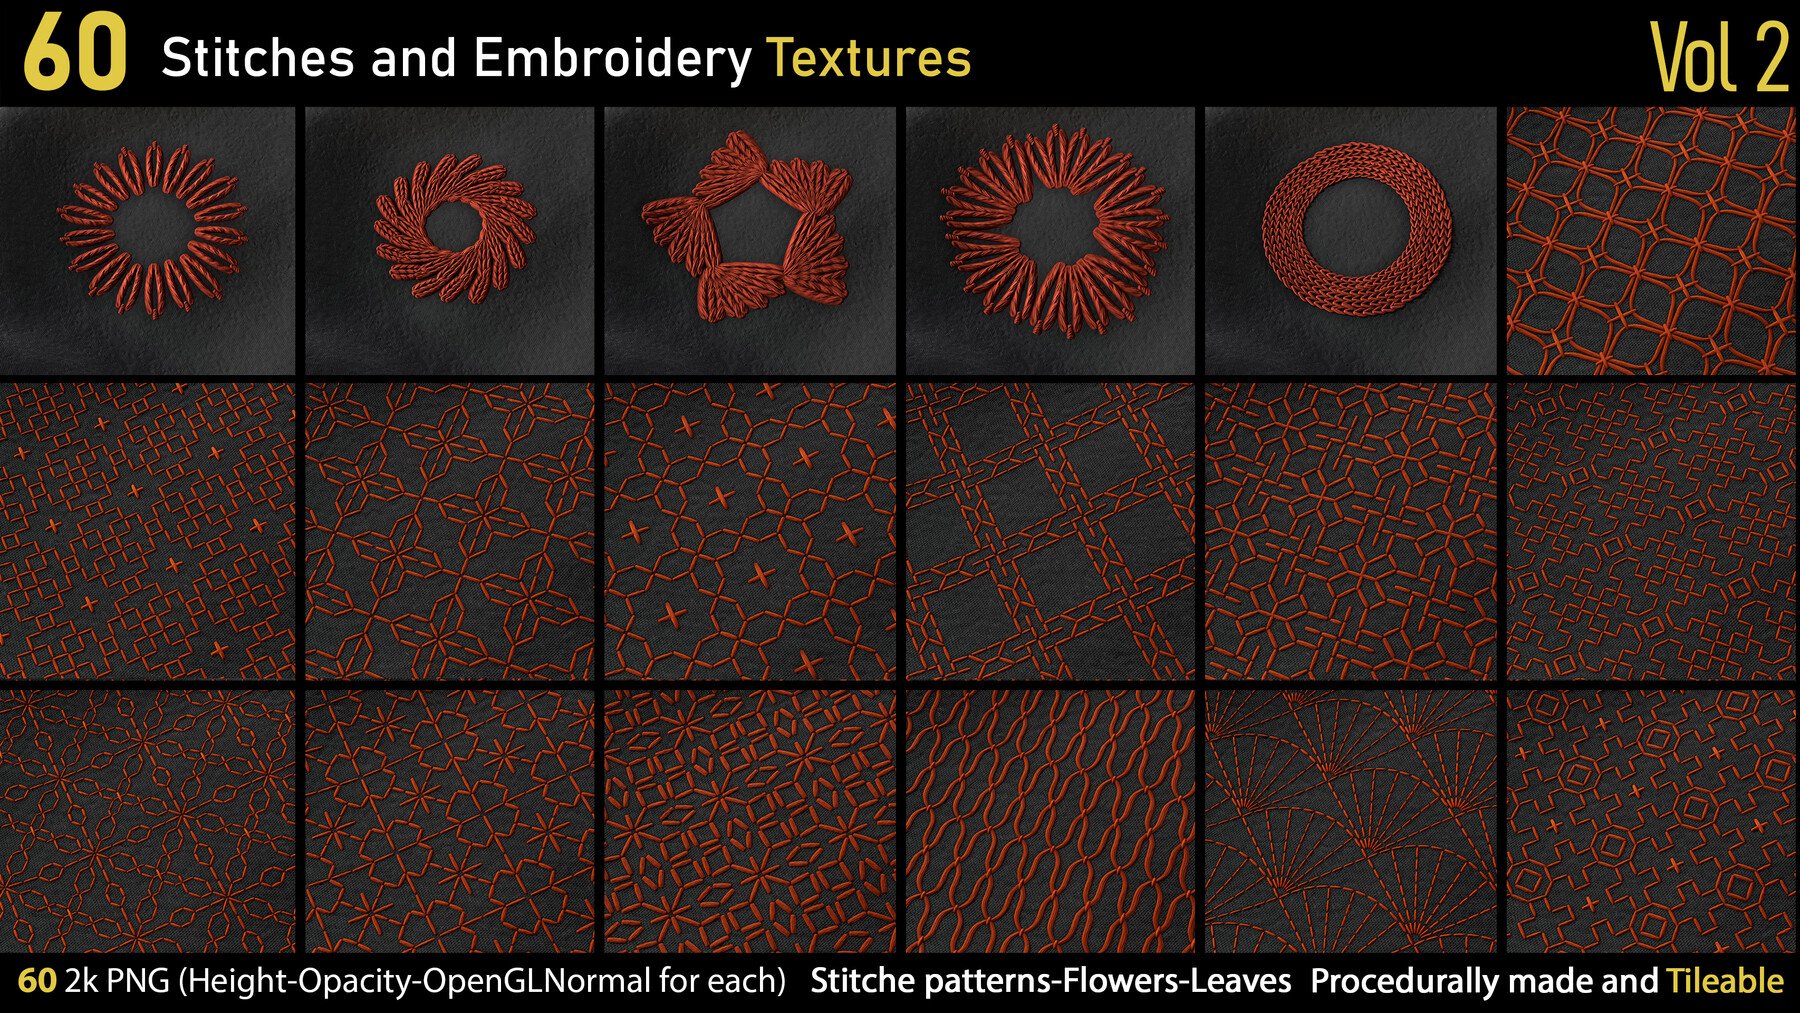 60 Stitches and Embroidery Textures Vol.2